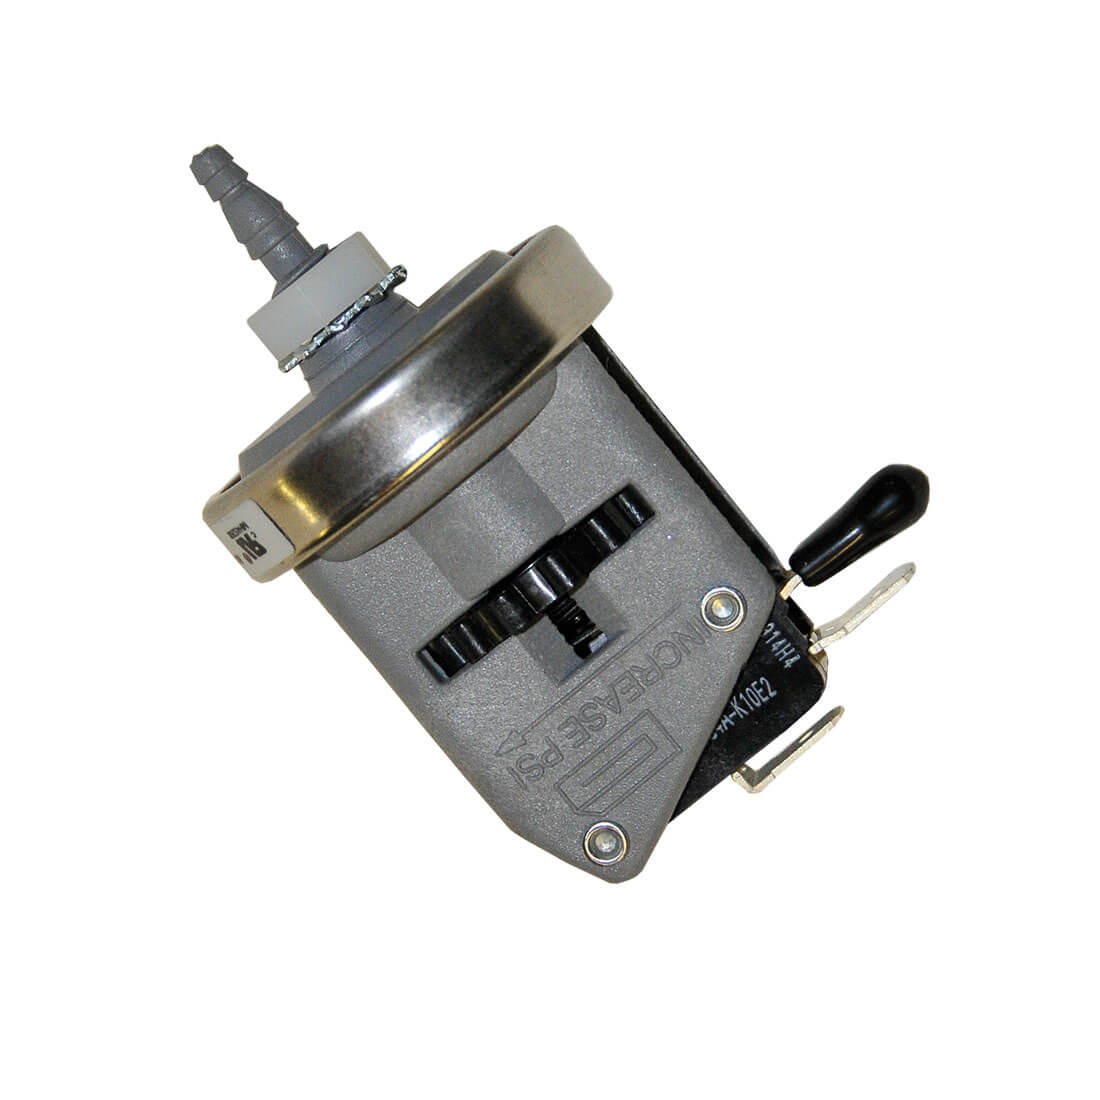 Hot Tub Pressure Switch with Barb 